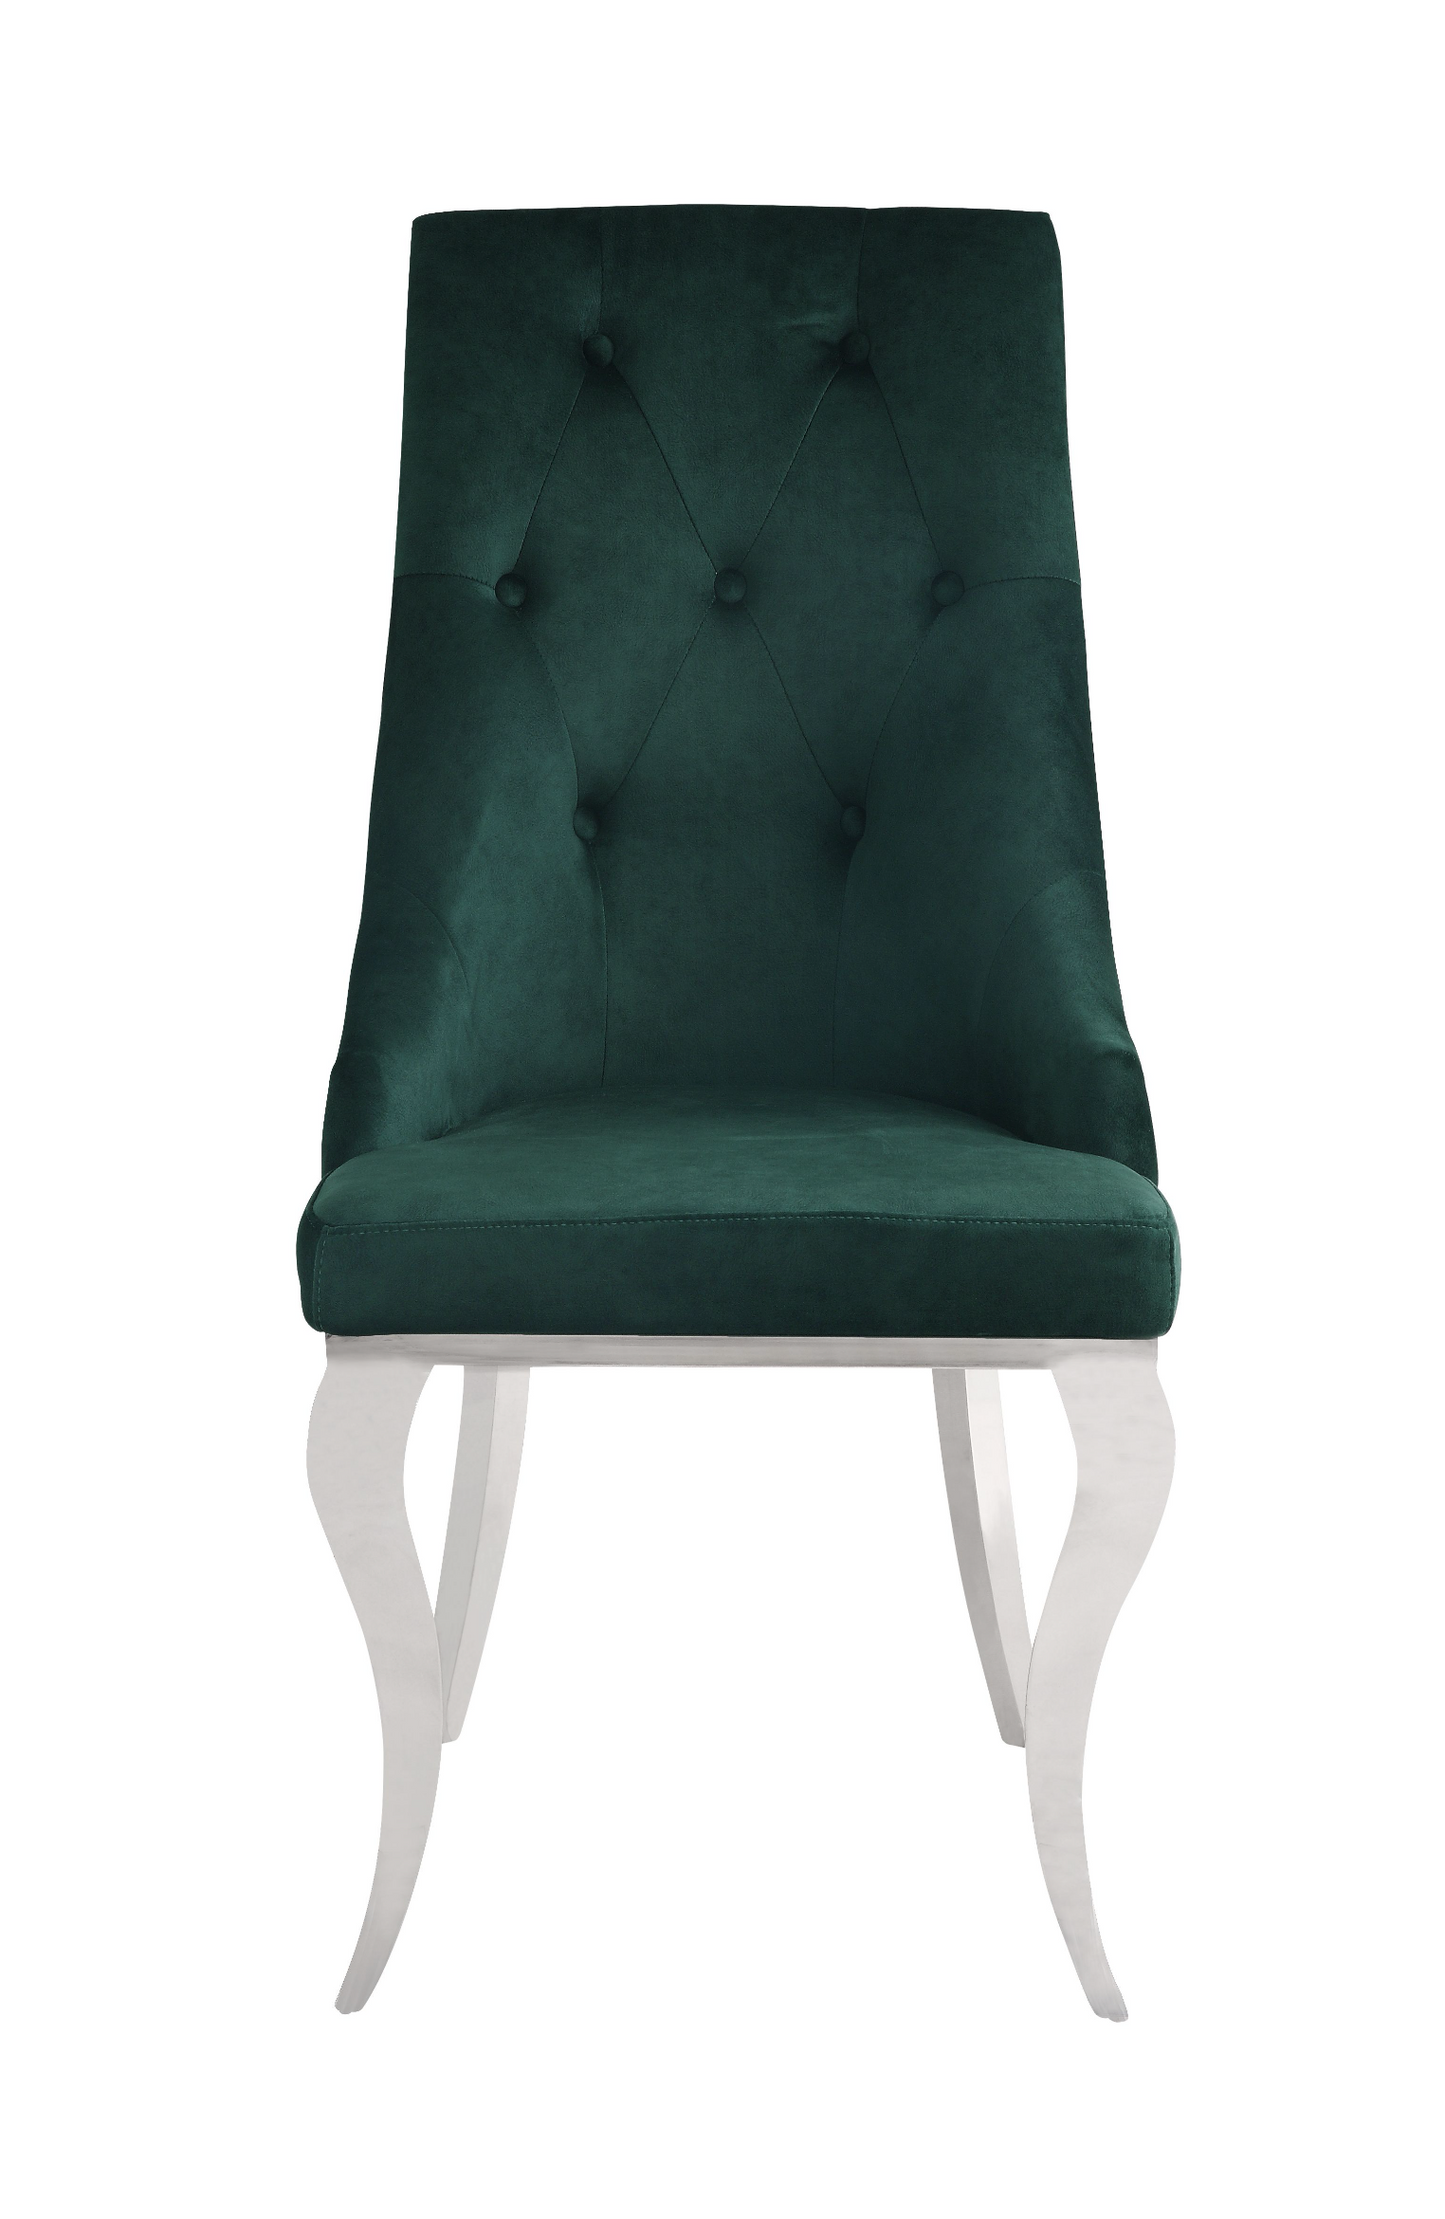 Green Fabric & Stainless Steel Dekel Dining Chairs (2 Set)